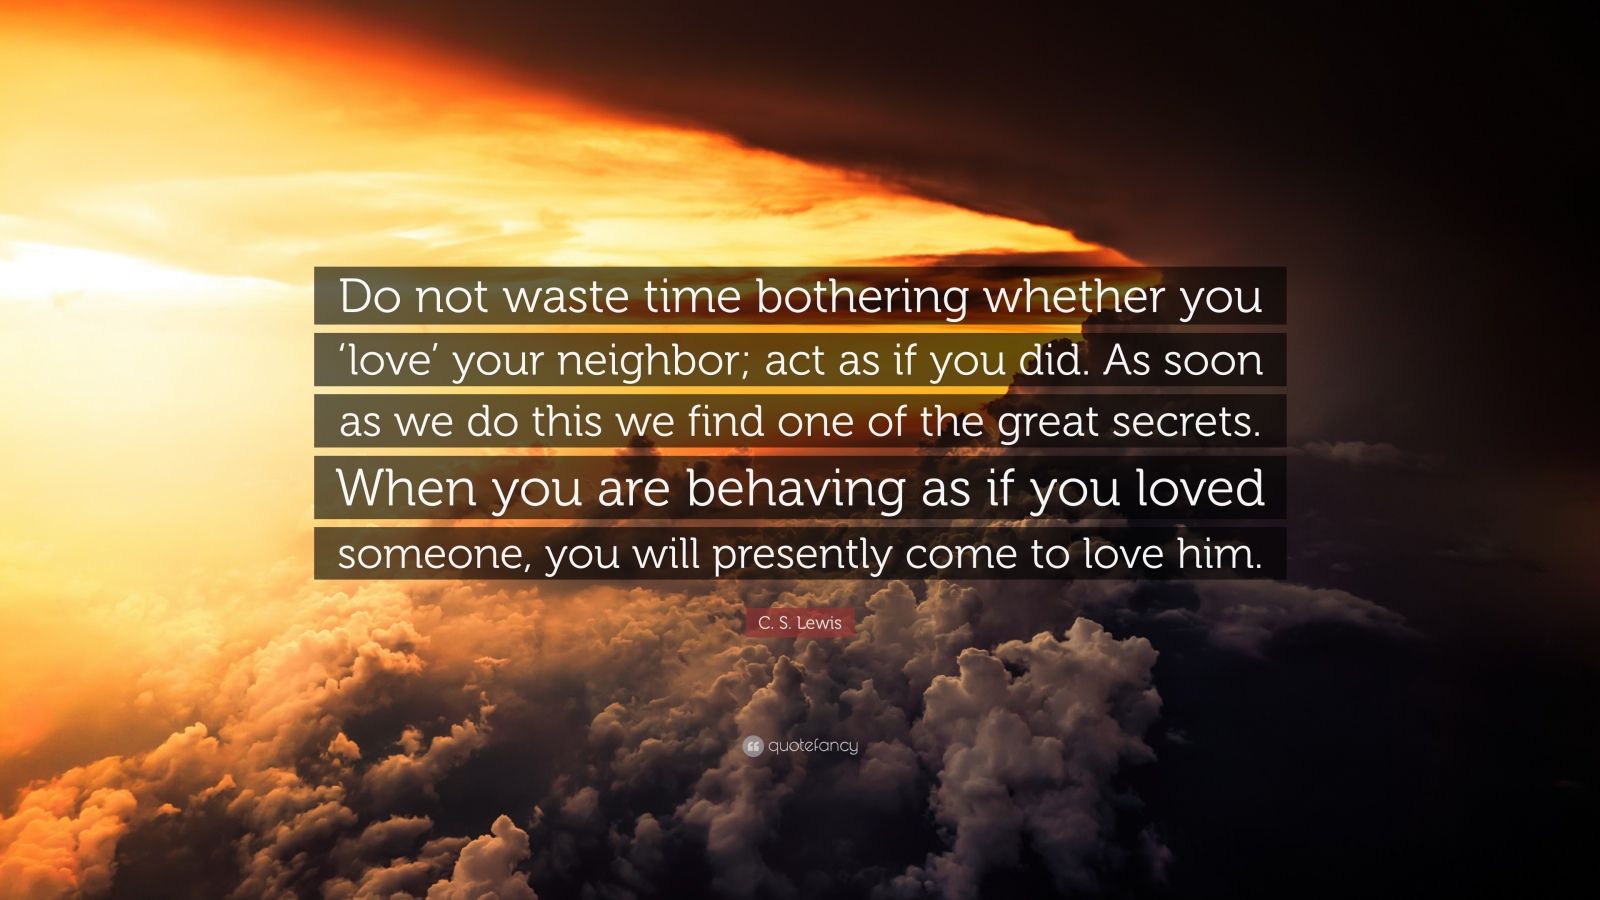 C. S. Lewis Quote: “Do not waste time bothering whether you ‘love’ your